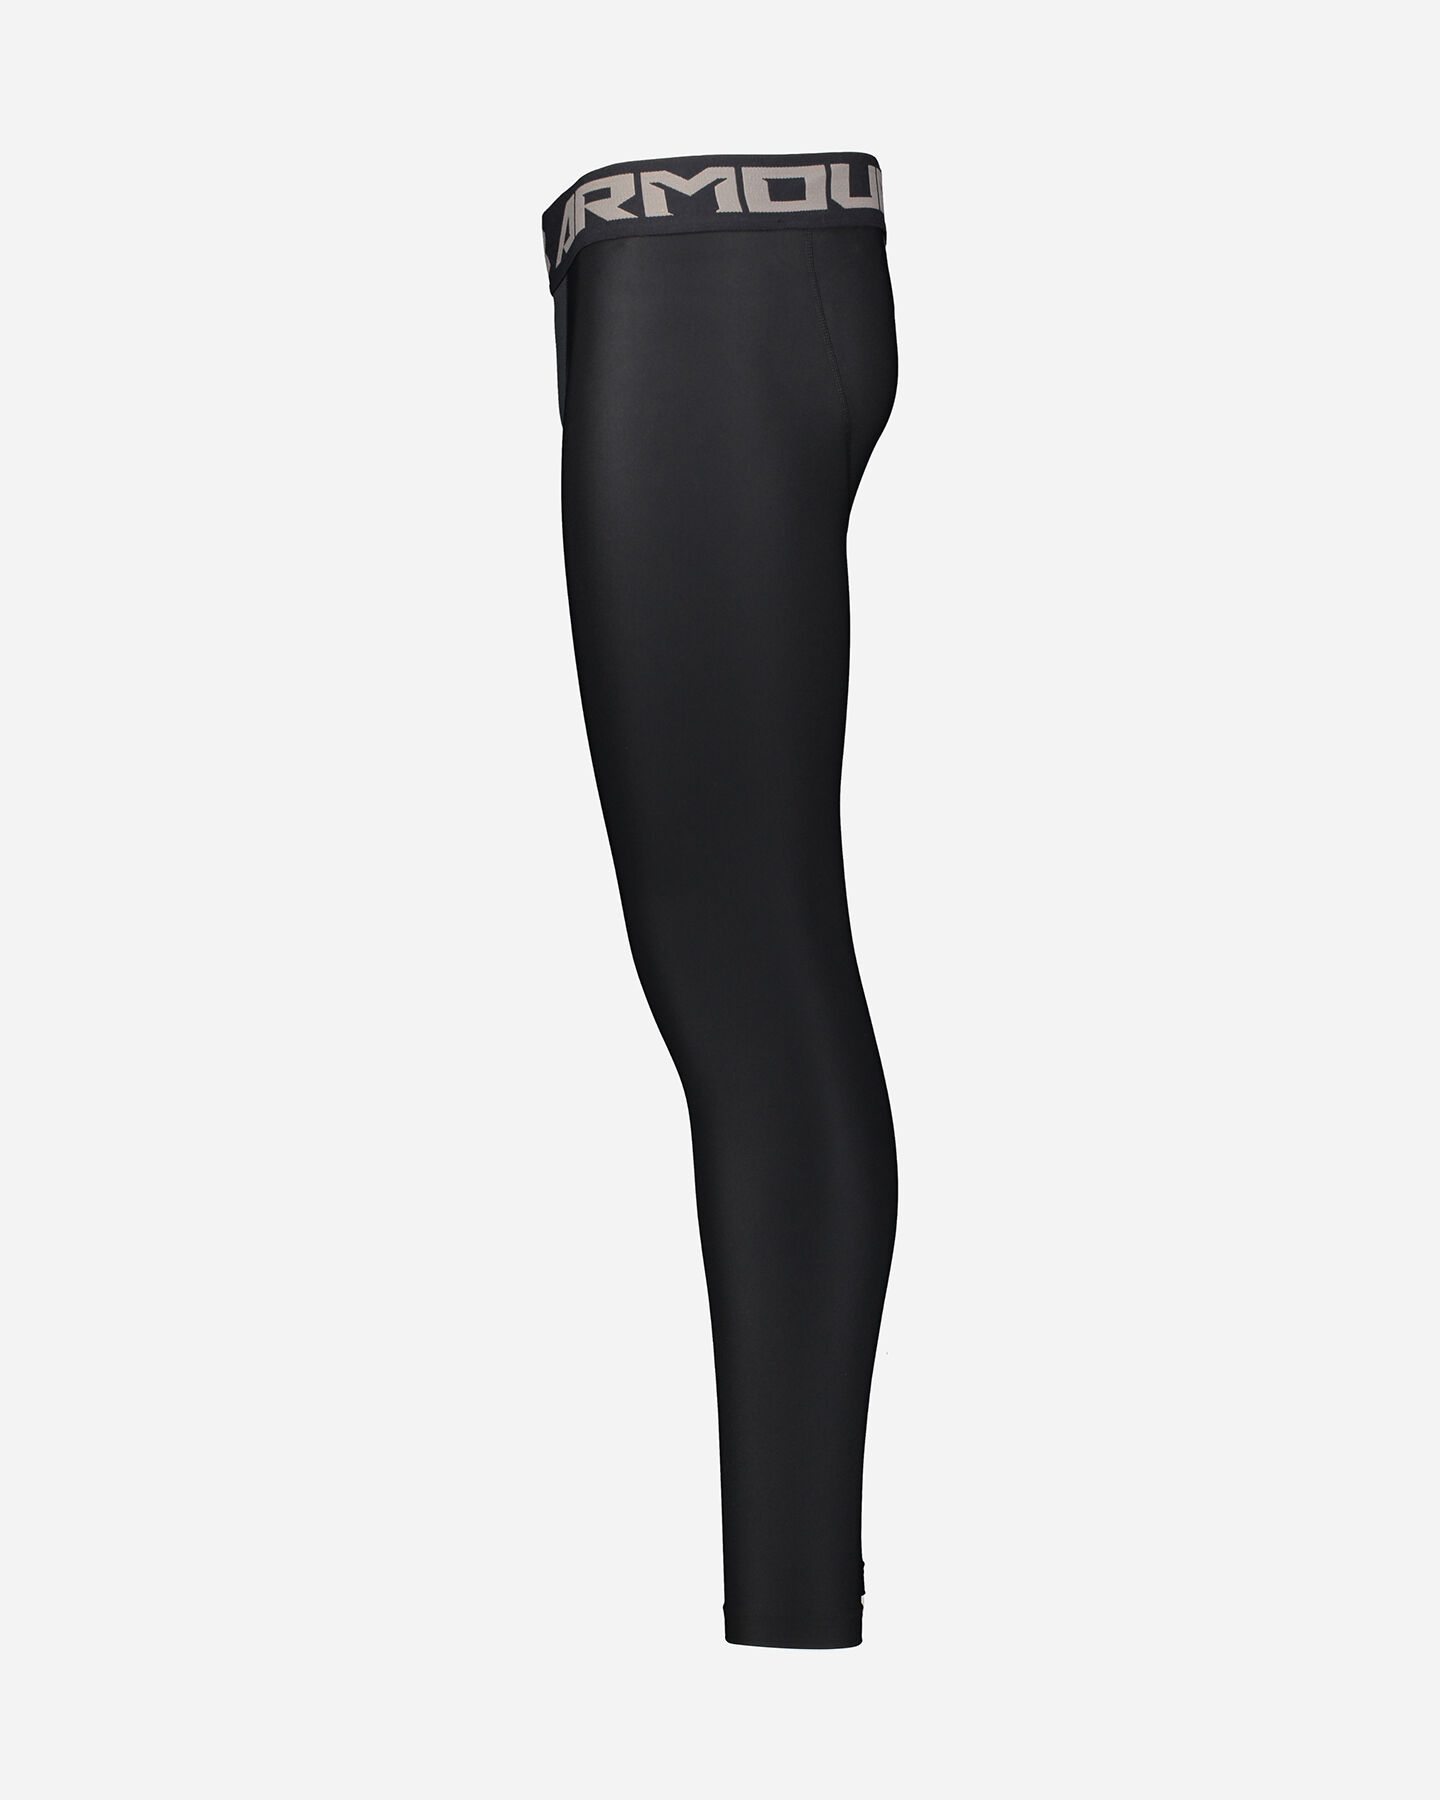  Pantalone training UNDER ARMOUR HG 2.0 M S5031436|0001|SM scatto 1